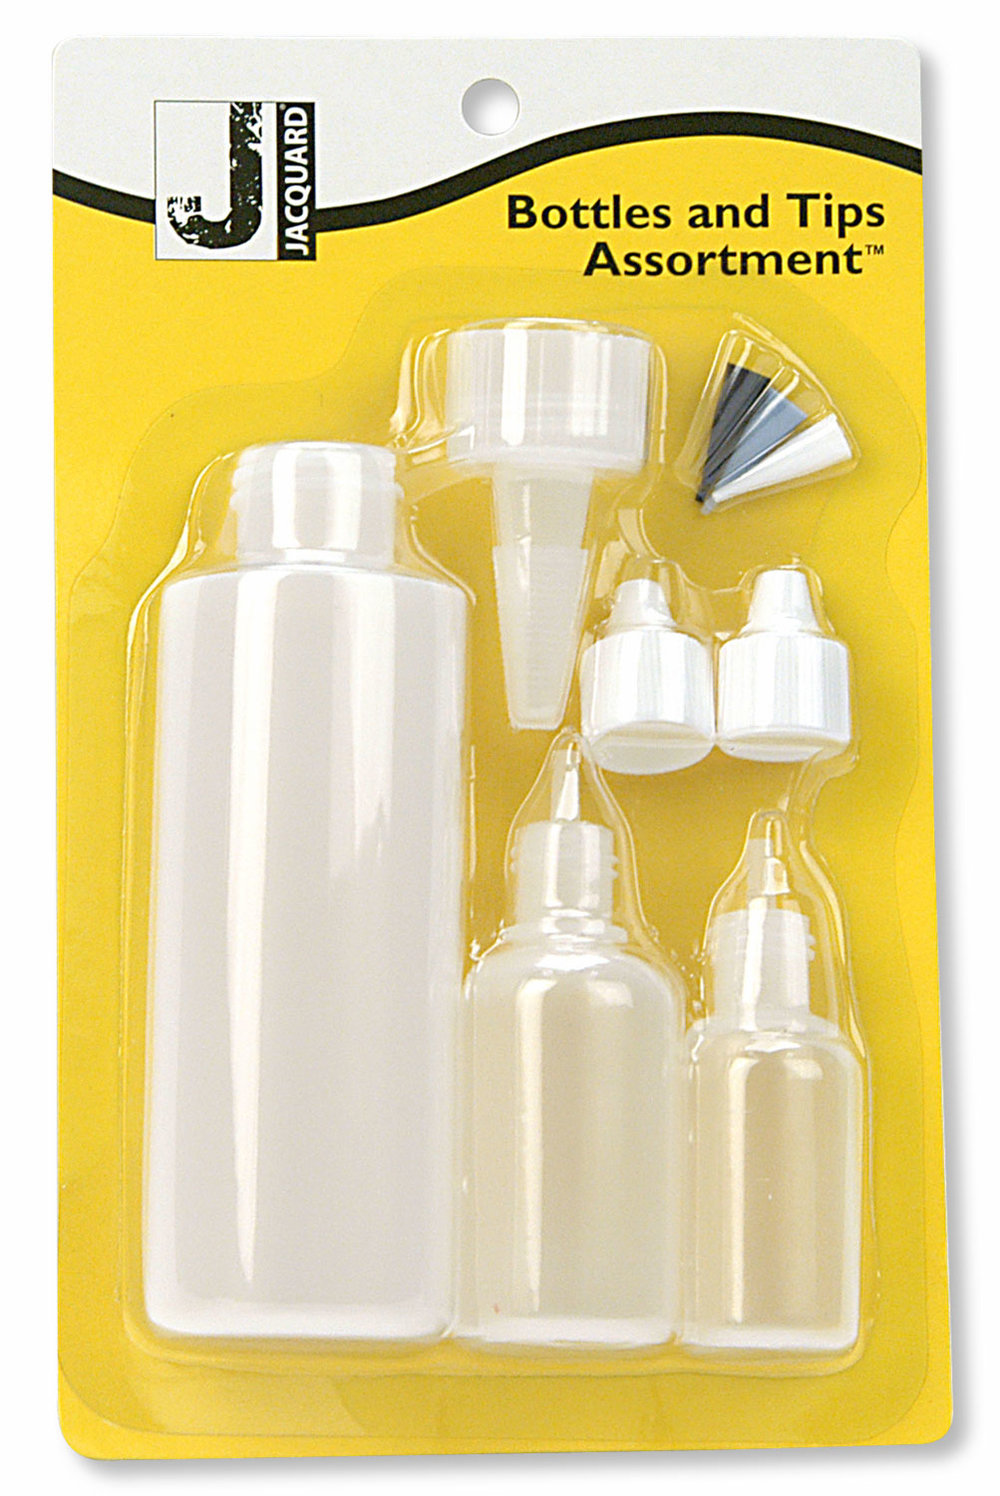 Jacquard 1/2 oz. Squeeze Bottle 3pk with Stainless Steel Tips .5